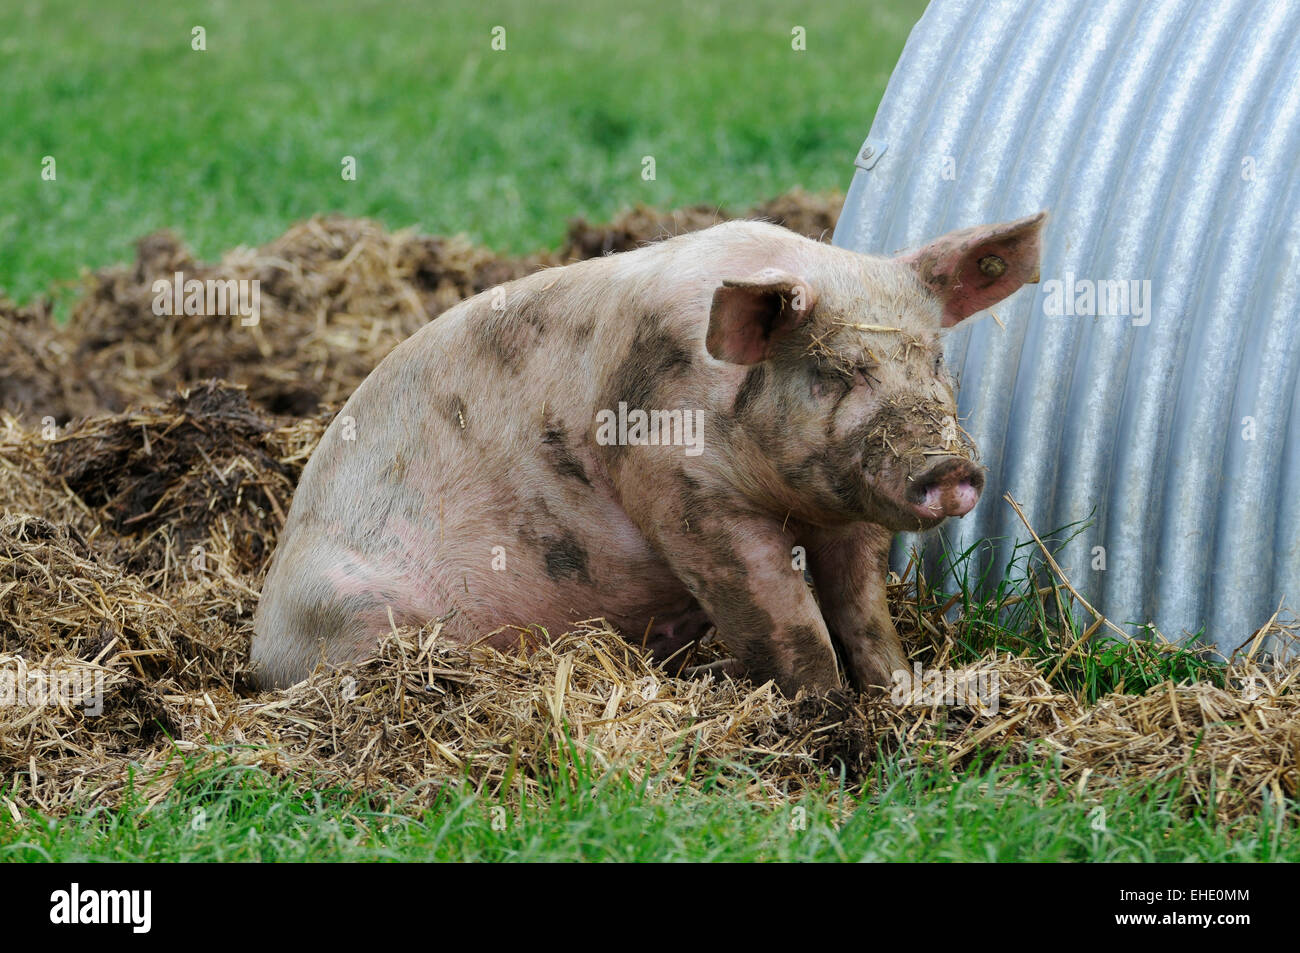 Pig on a organic farm in england UK europe Stock Photo